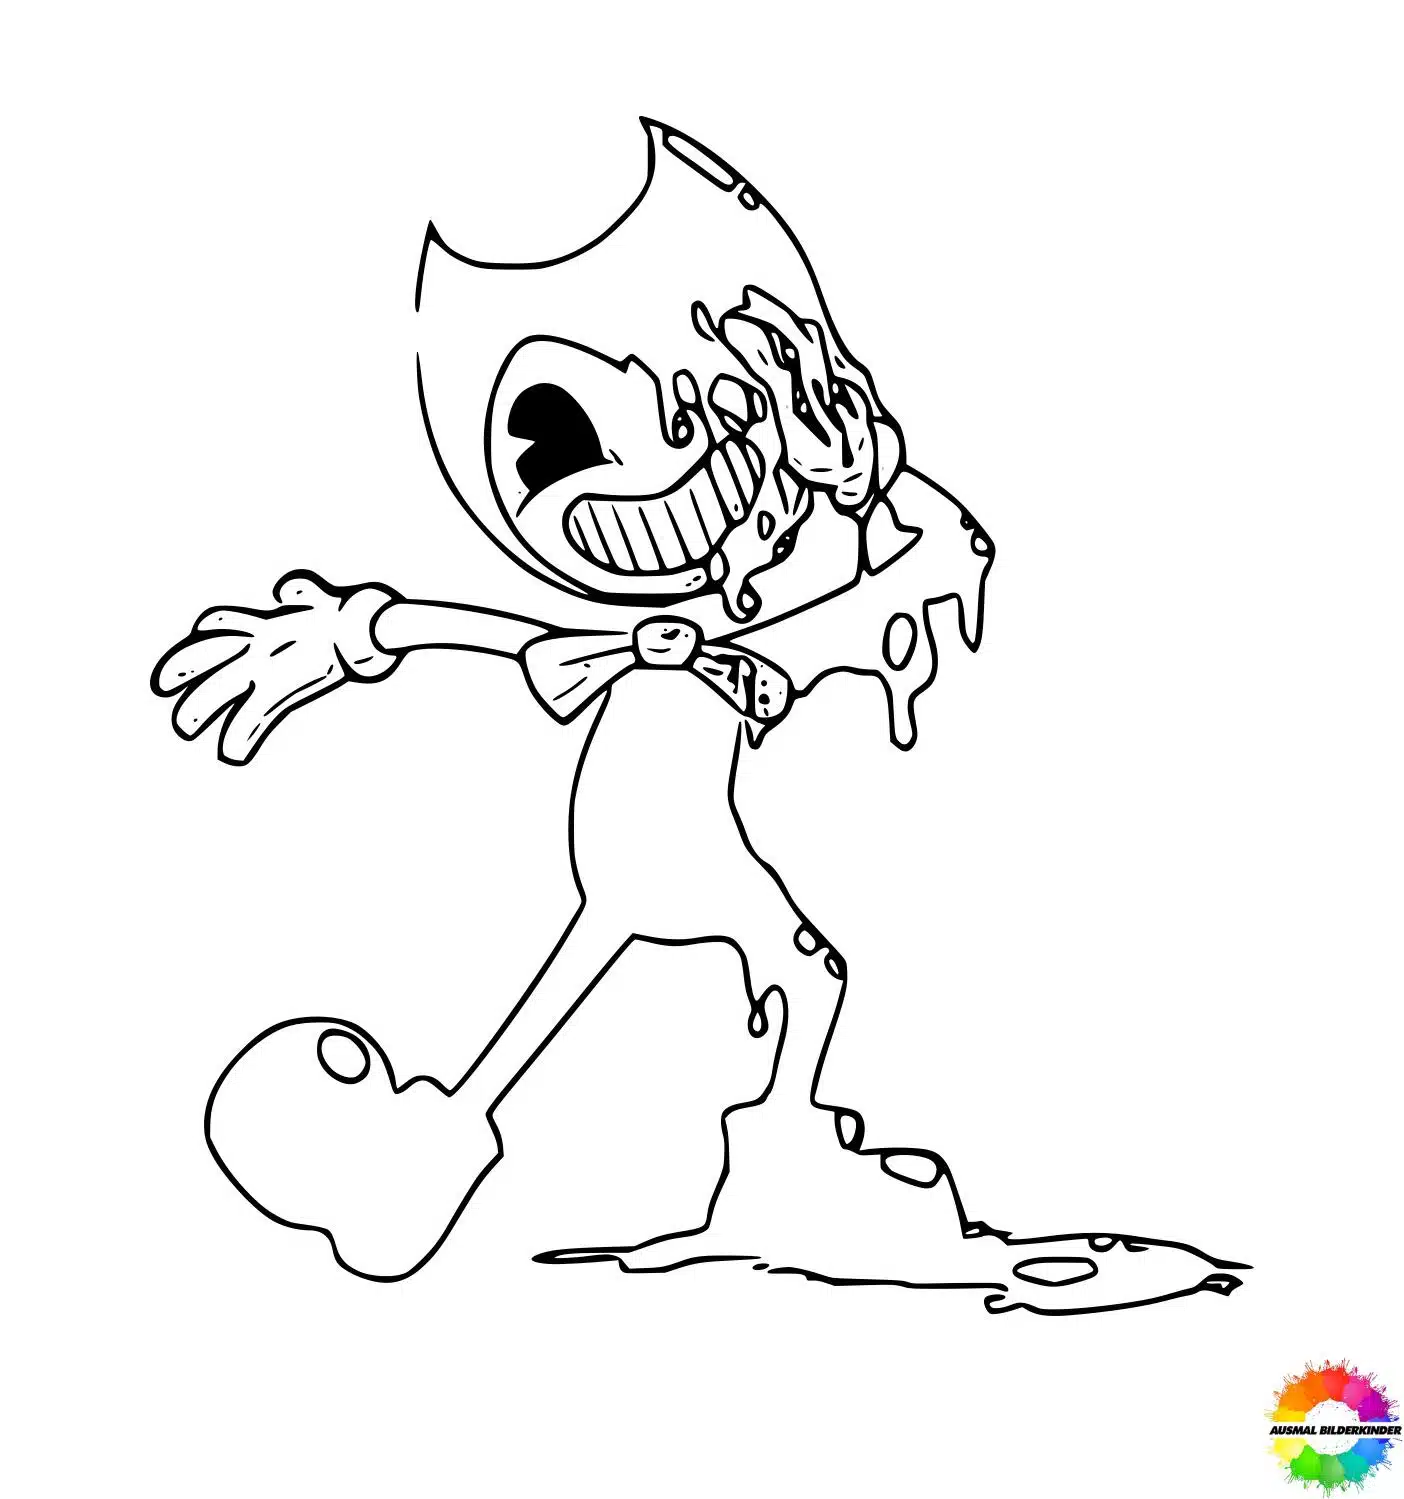 Bendy and the ink machine coloring pages free for children